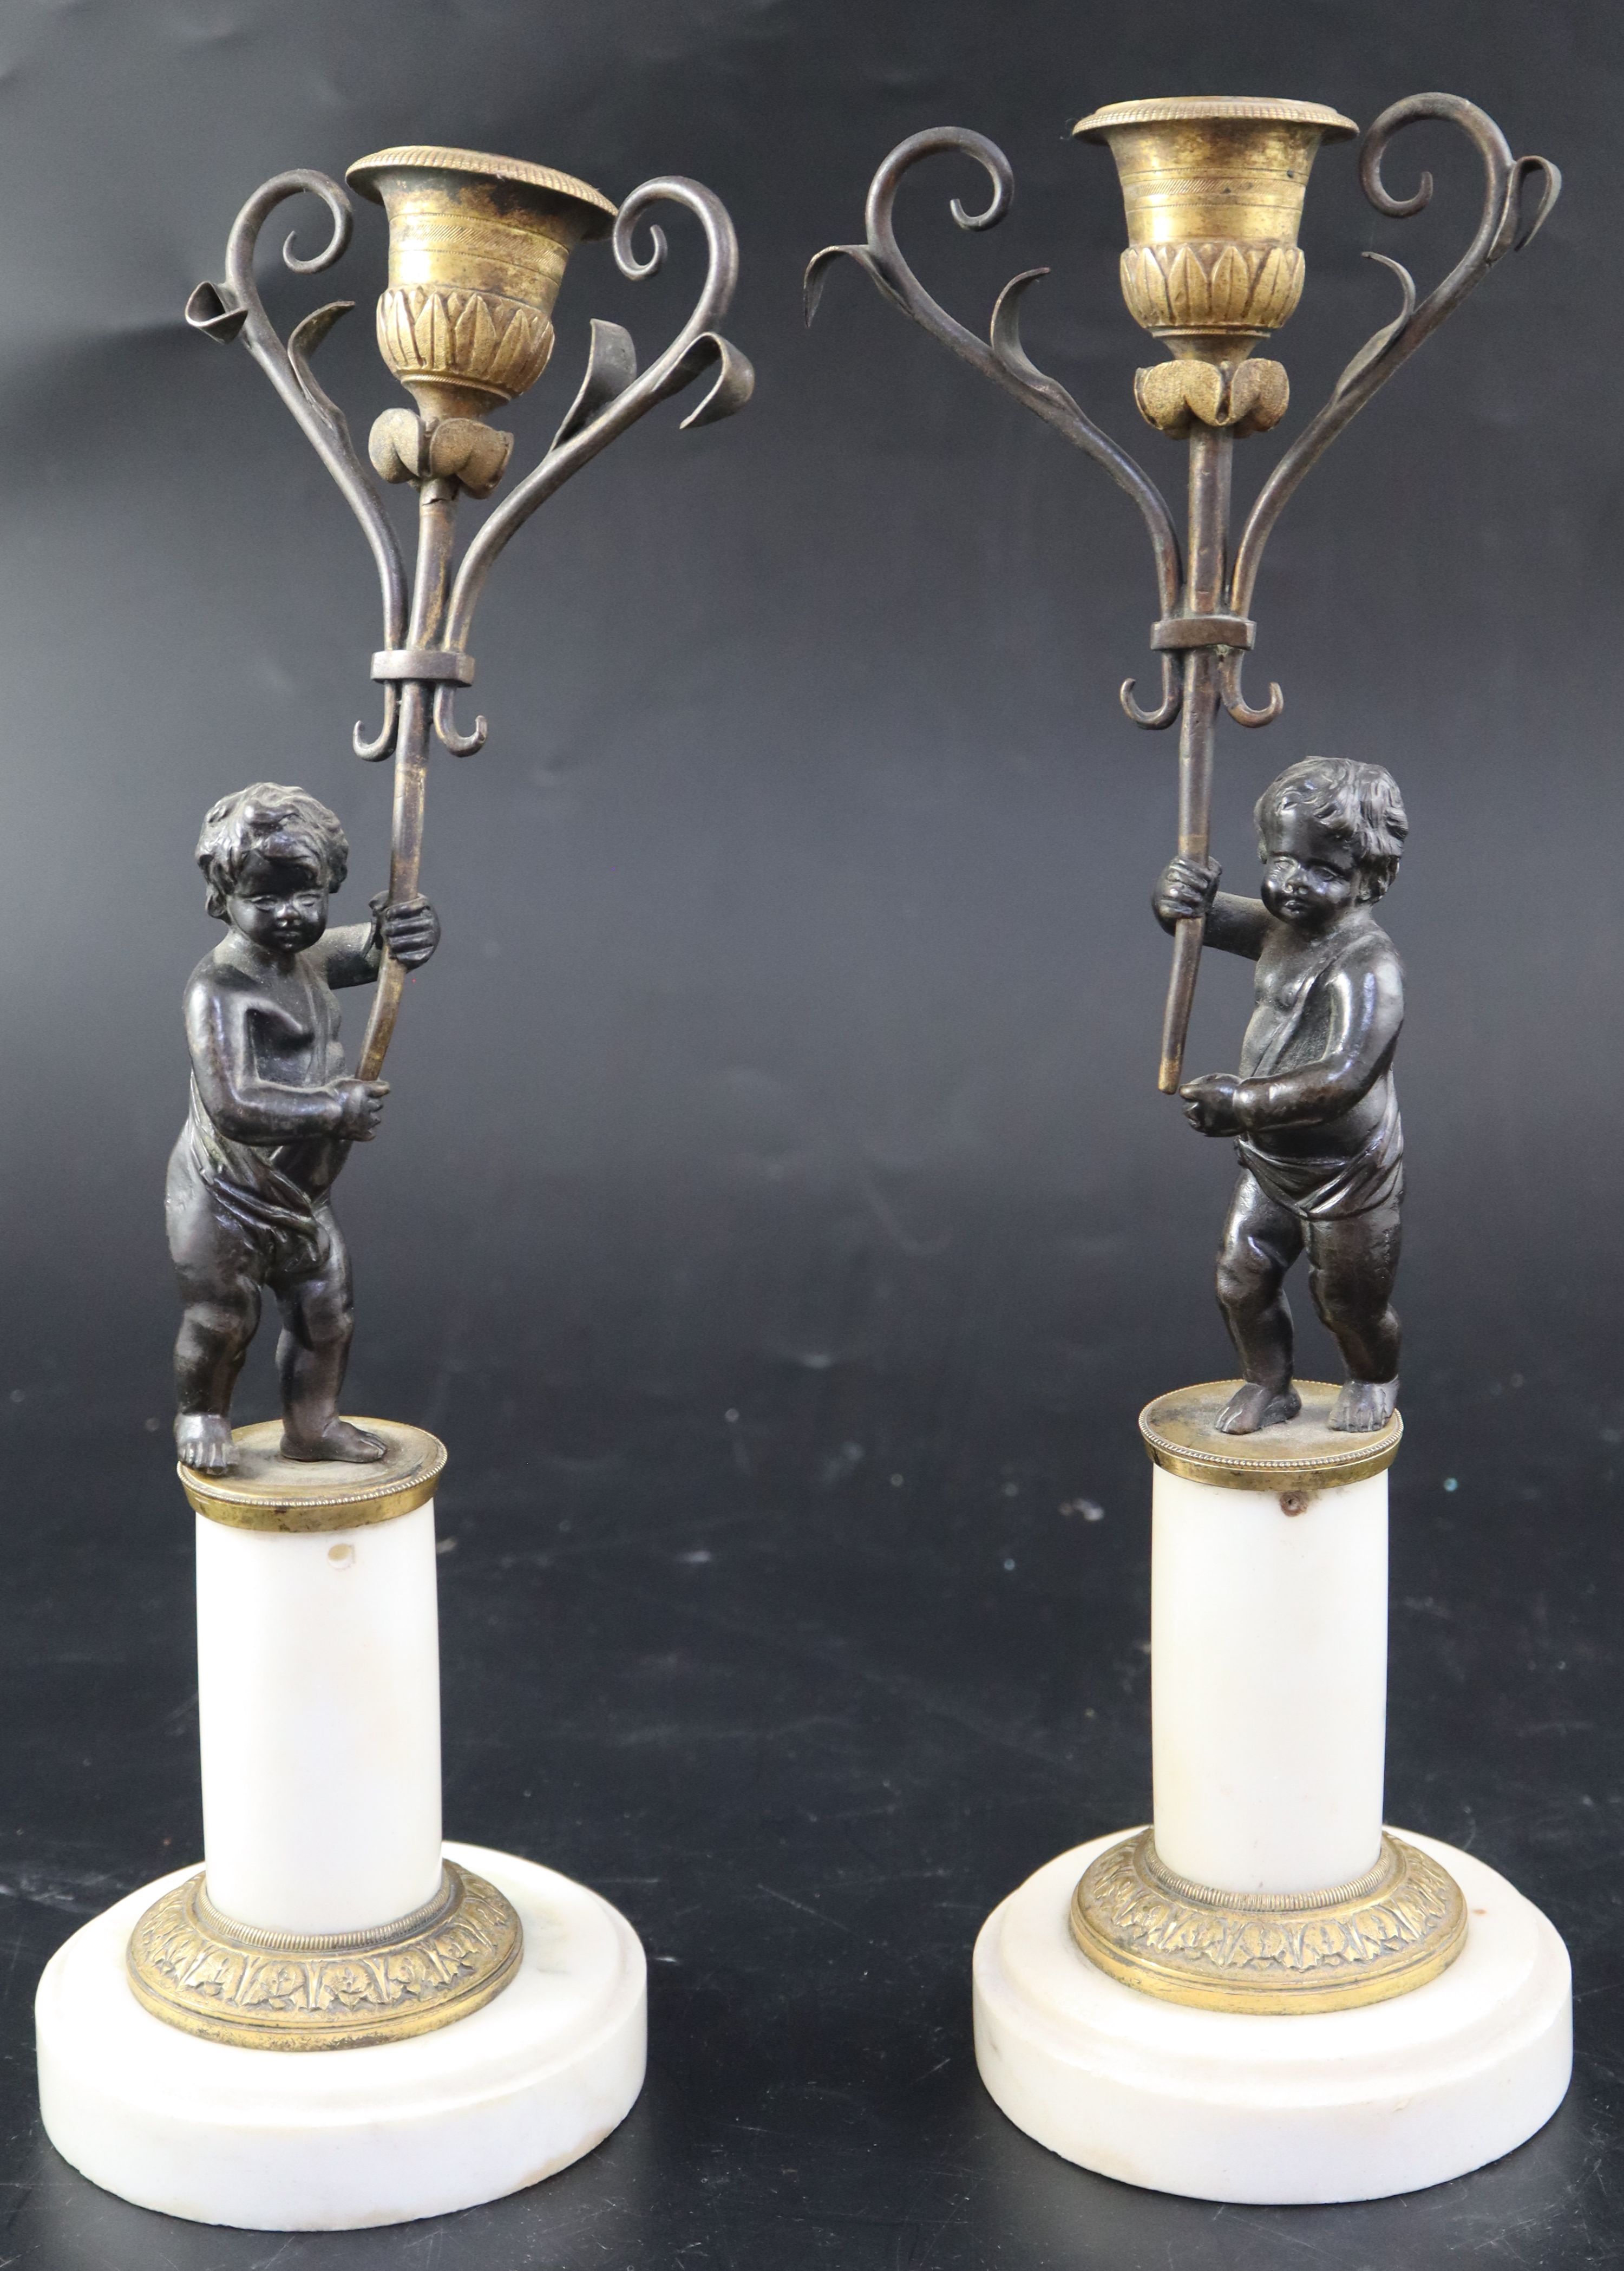 A pair of 19th century French bronze and ormolu candelabra, modelled with putti holding scrolling branches